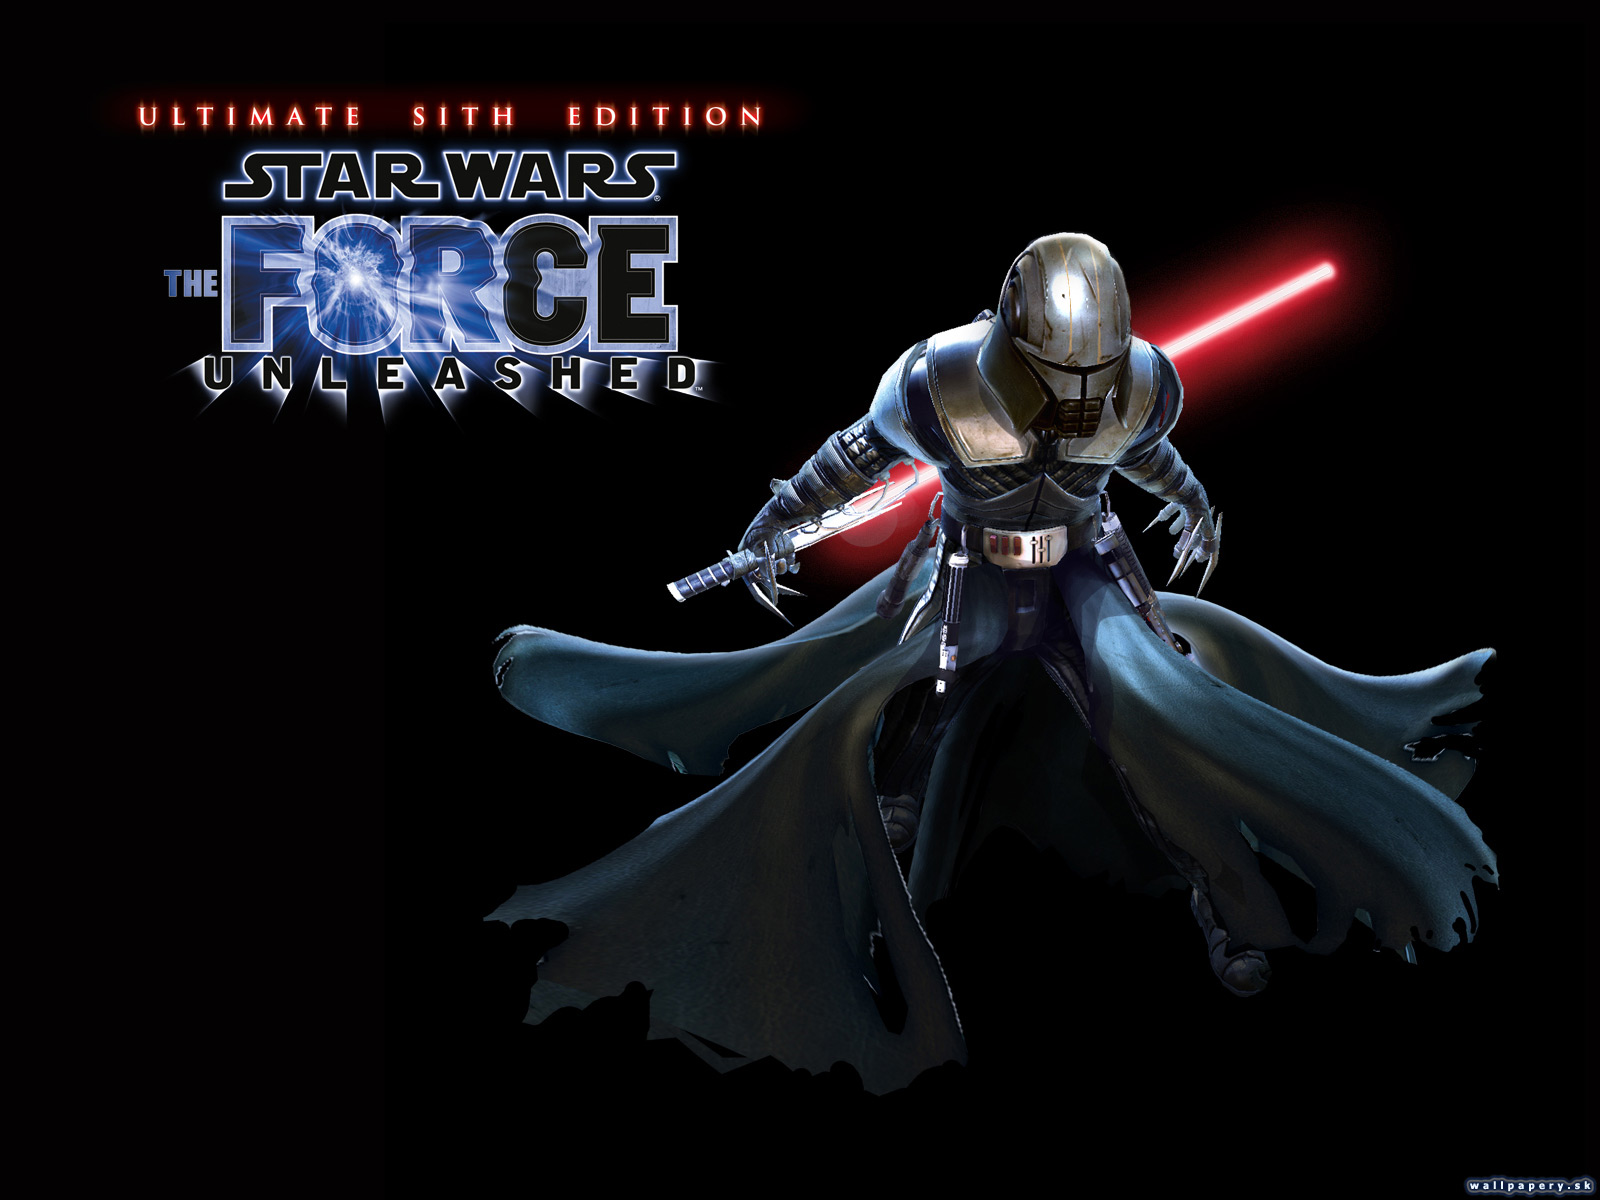 Star Wars: The Force Unleashed - Ultimate Sith Edition - wallpaper 3